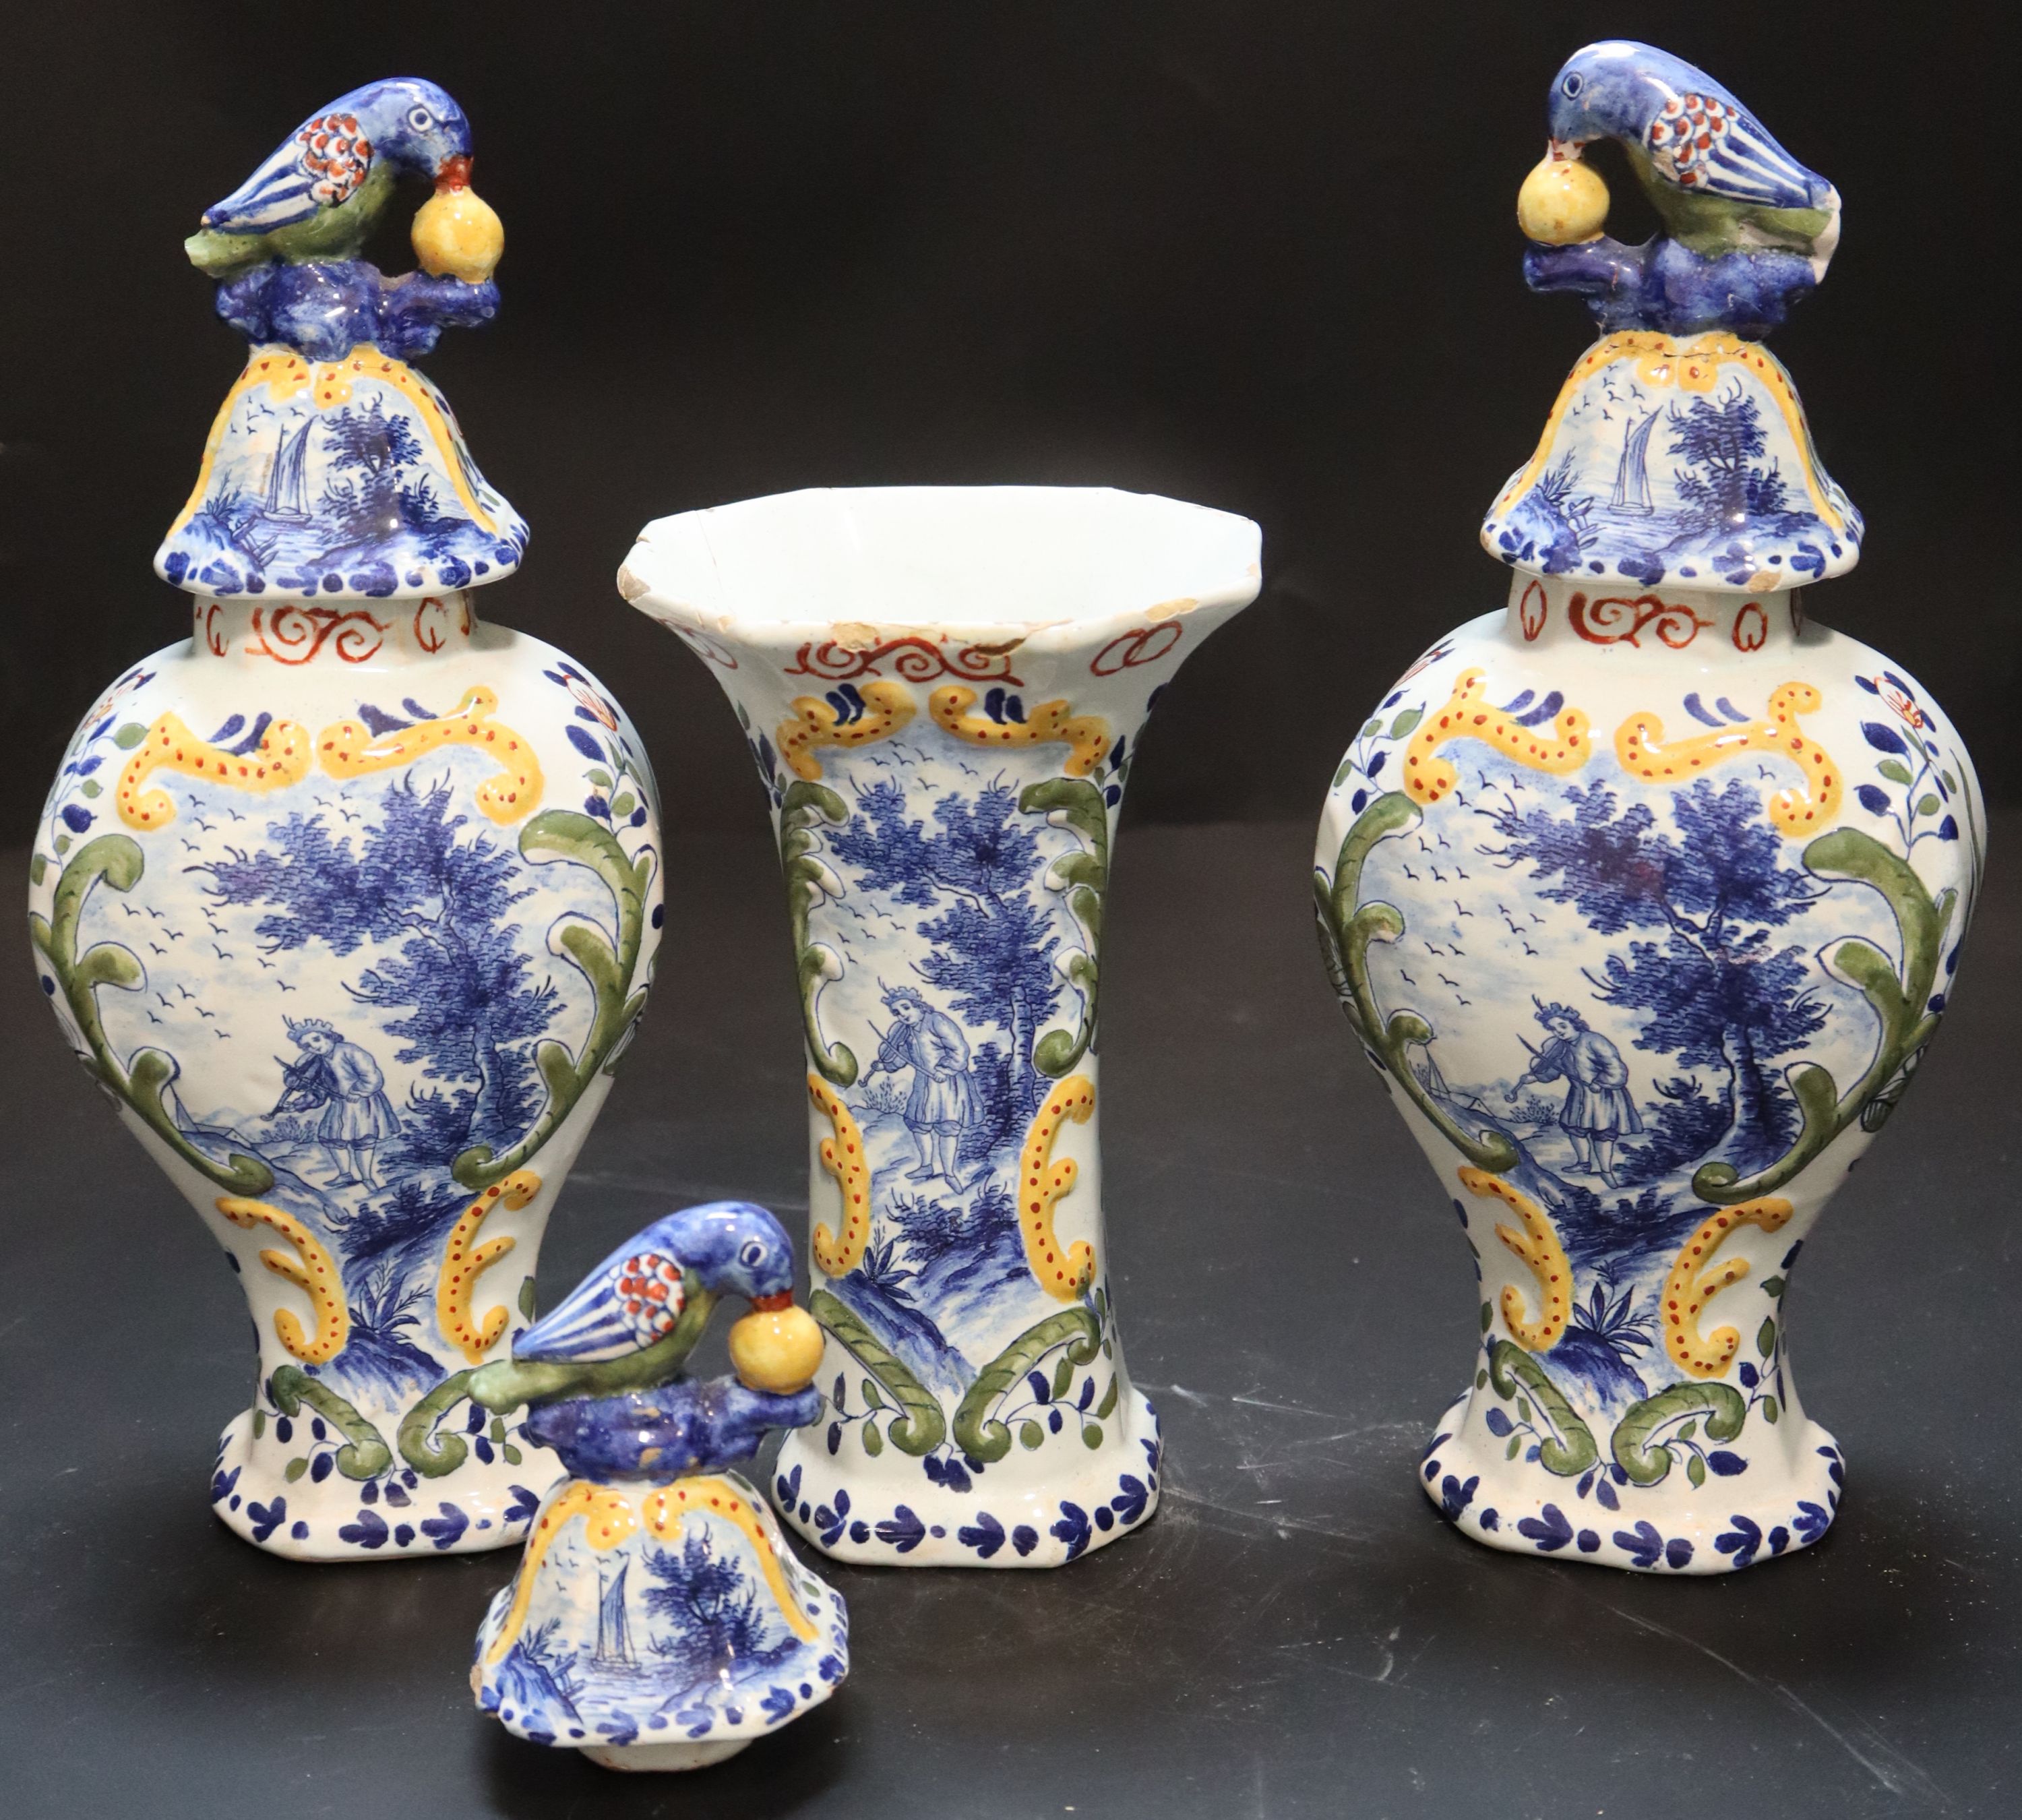 A 19th century Dutch delft polychrome part garniture of three vases, height 27cm and 19cm.